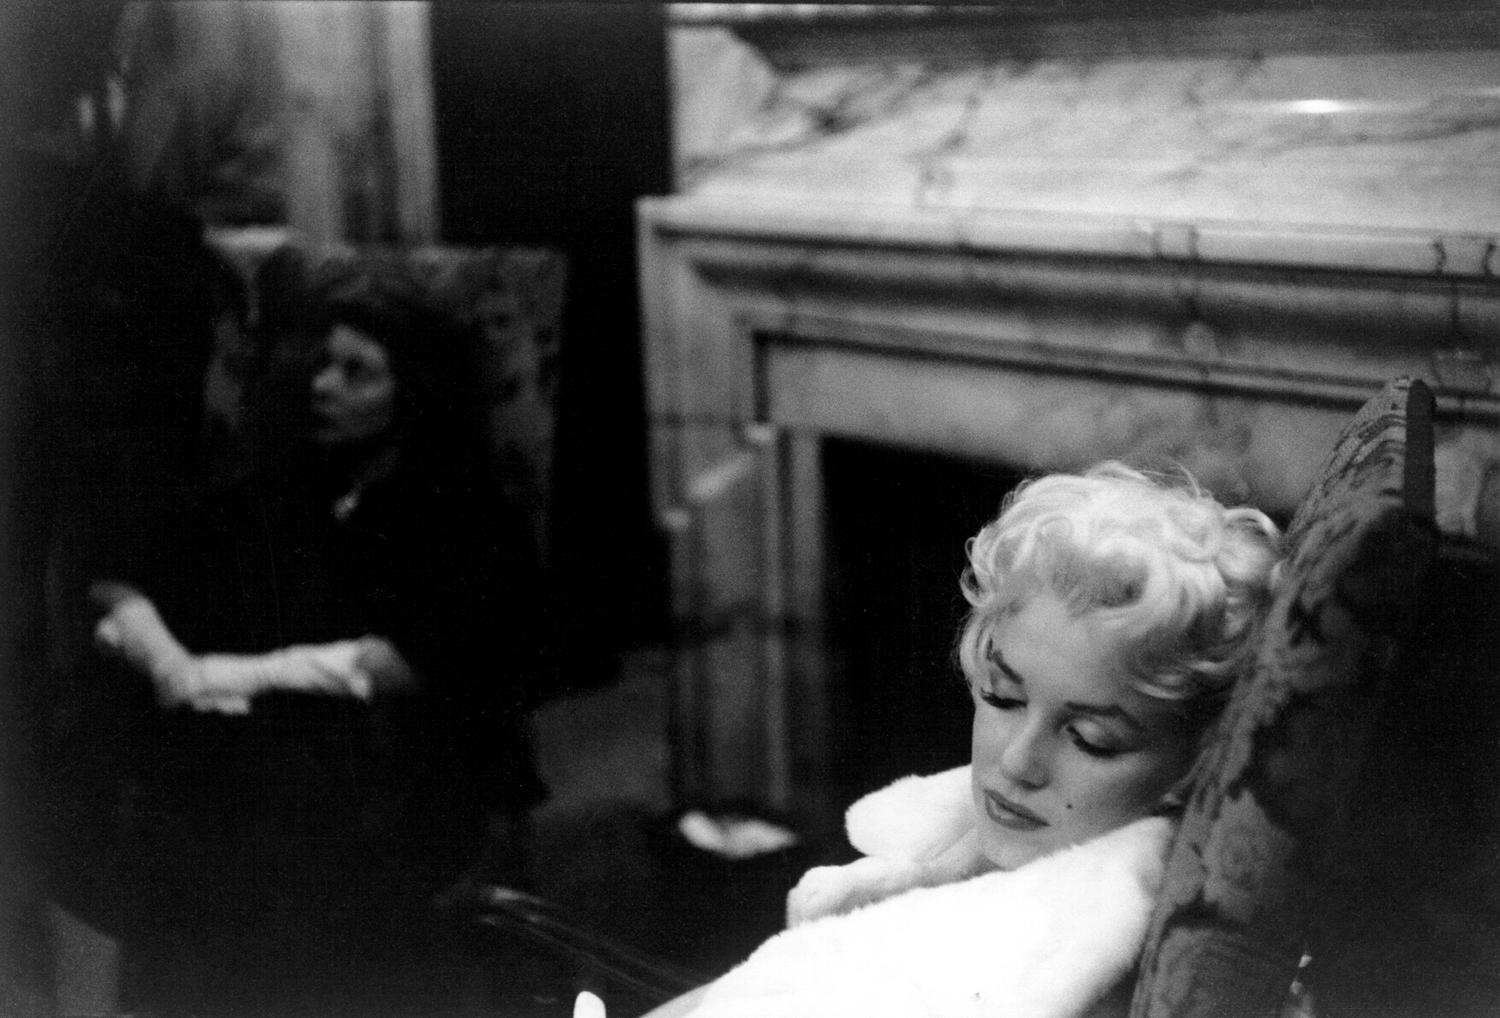 Actress Marilyn Monroe rests her eyes wearing a white fur coat on March 24, 1955 in New York City.